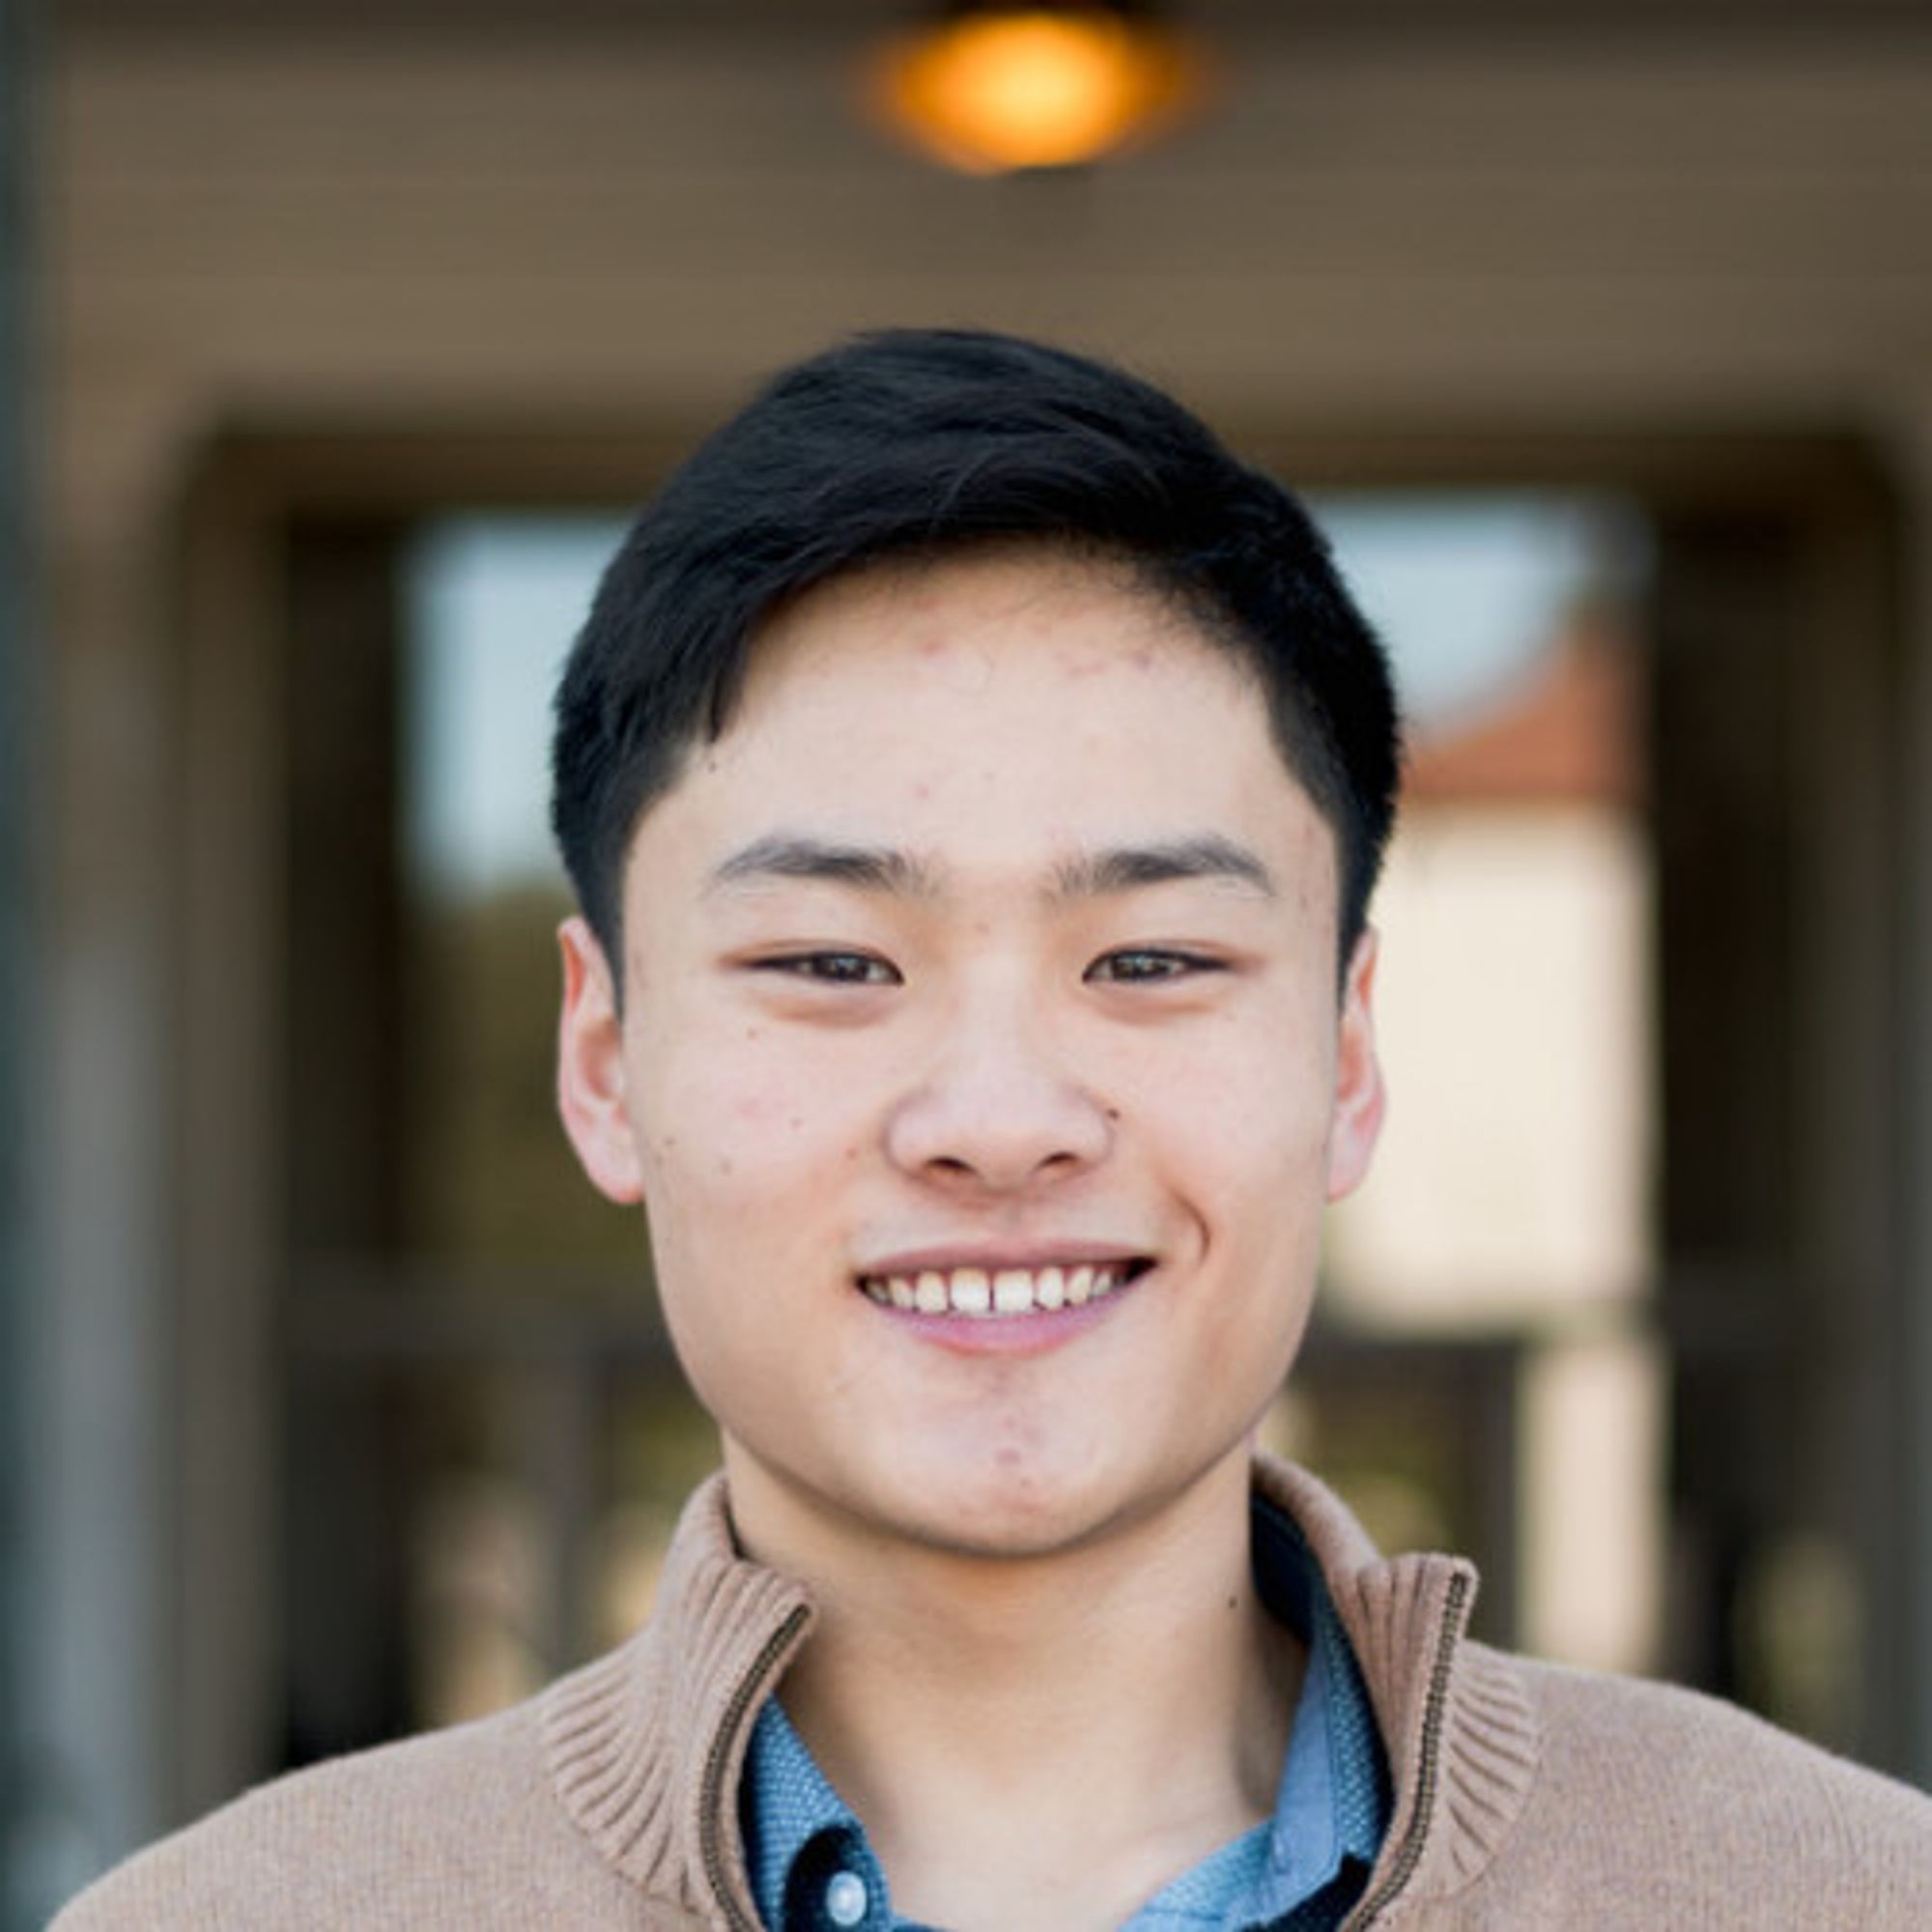 Michael Chen 
Software Engineer
Prior Eng Intern @Citadel • Graduated in EECS from UC Berkeley in 2.5 years • Loves all sports!